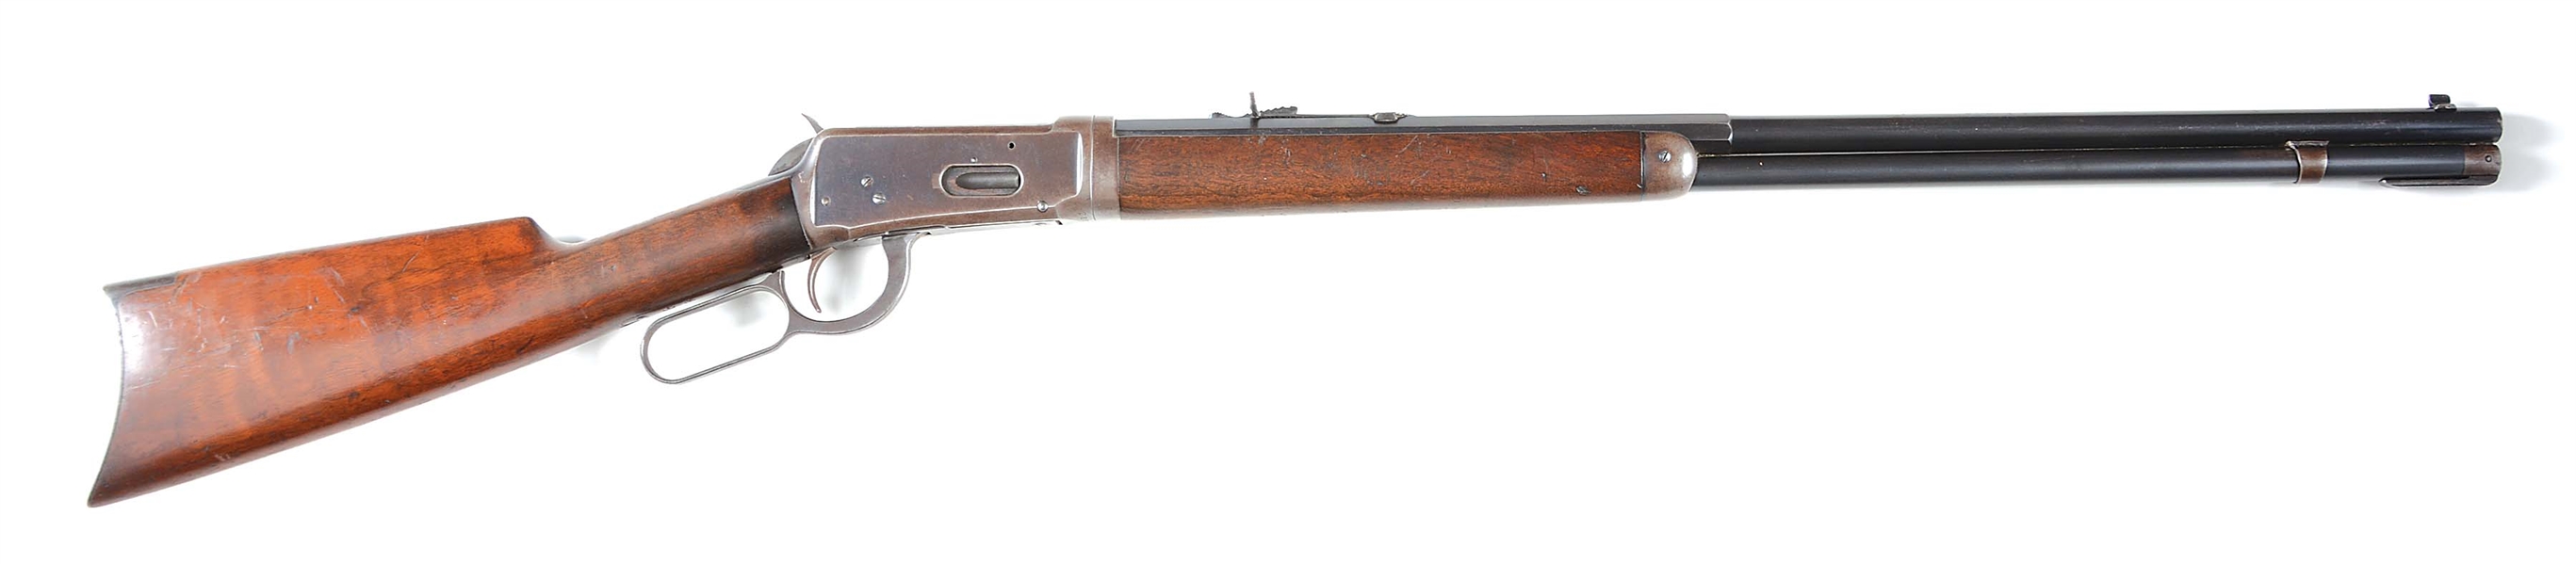 (C) WINCHESTER MODEL 1894 TAKEDOWN LEVER ACTION RIFLE (1903).